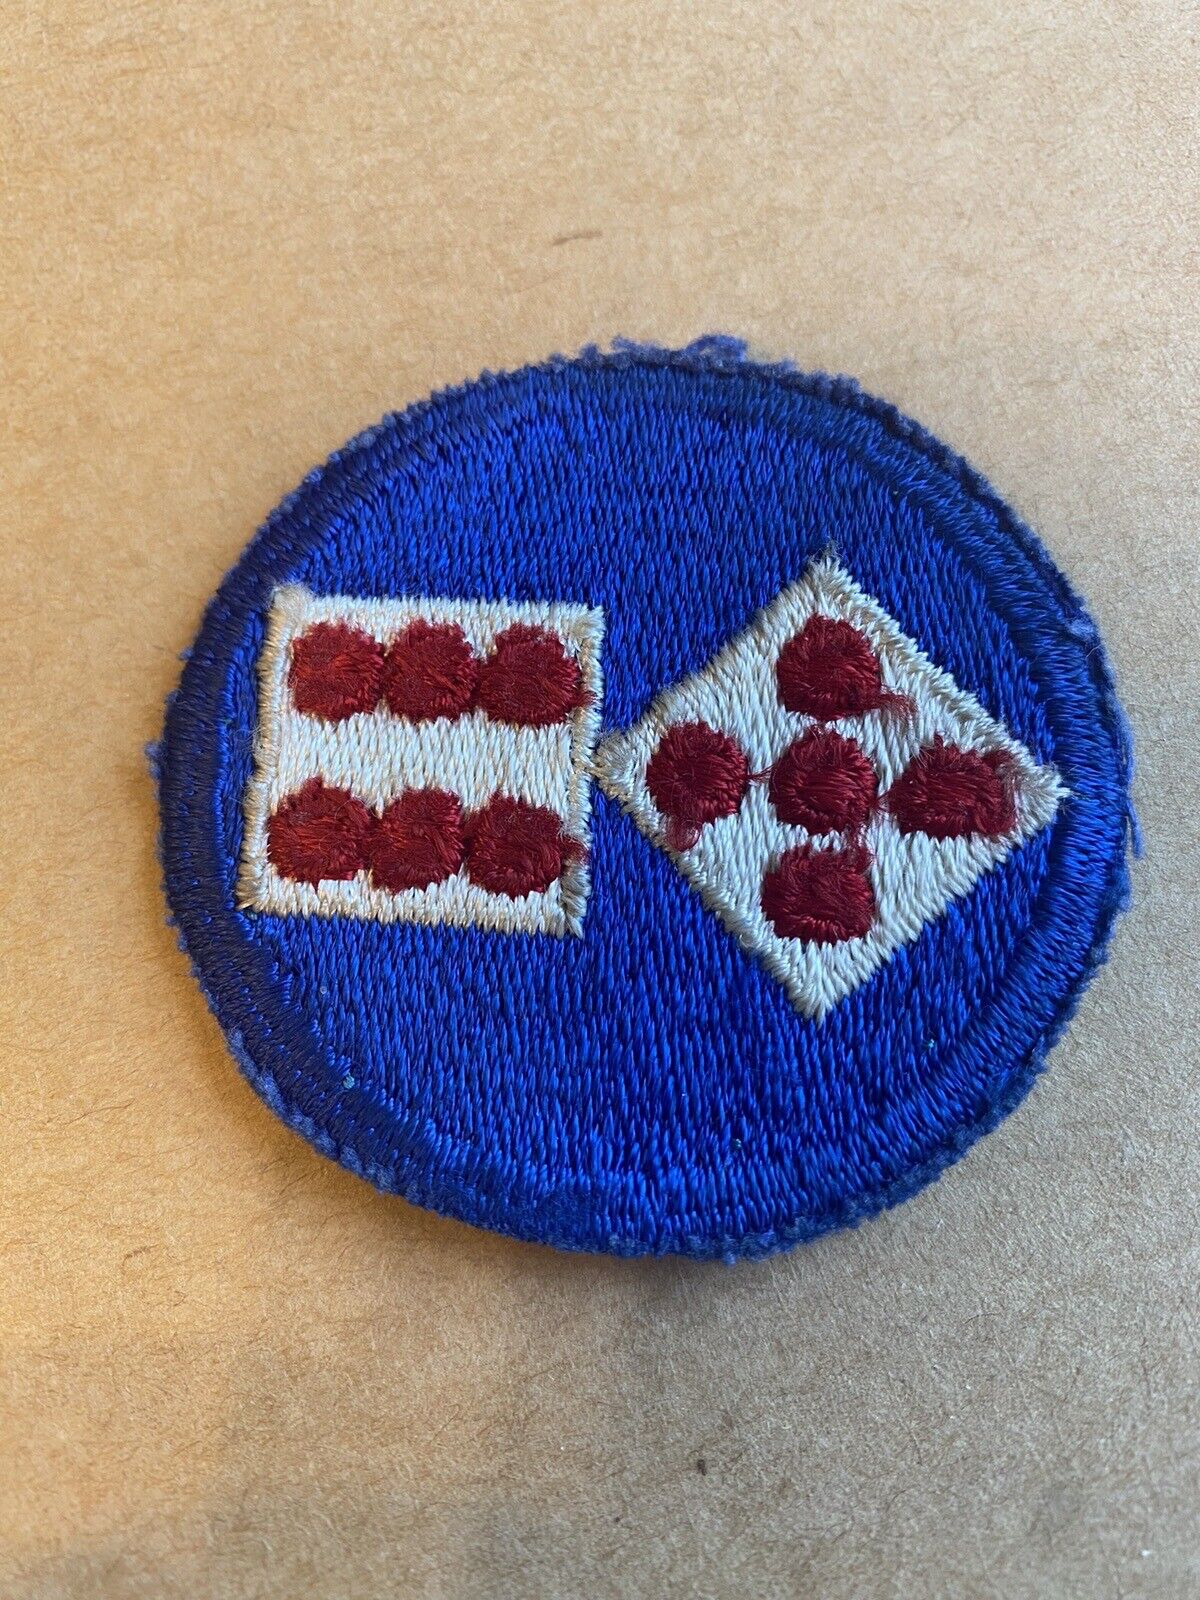 The 11th Corps Army Patch-BIG DOTs VARIANT--------------------------Original WW2